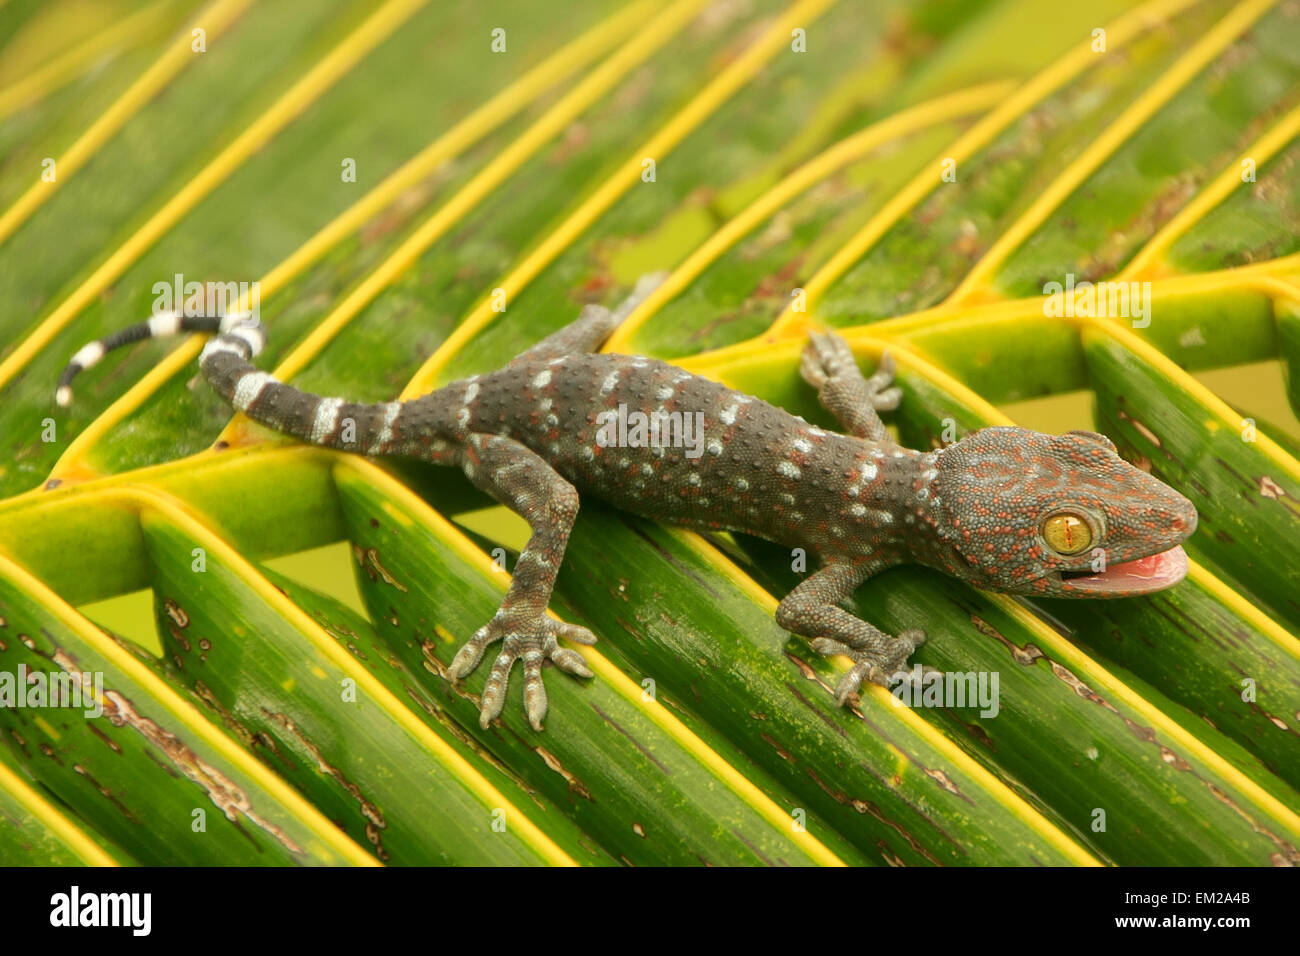 Young tokay gecko on a palm tree leaf, Ang Thong National Marine Park, Thailand Stock Photo